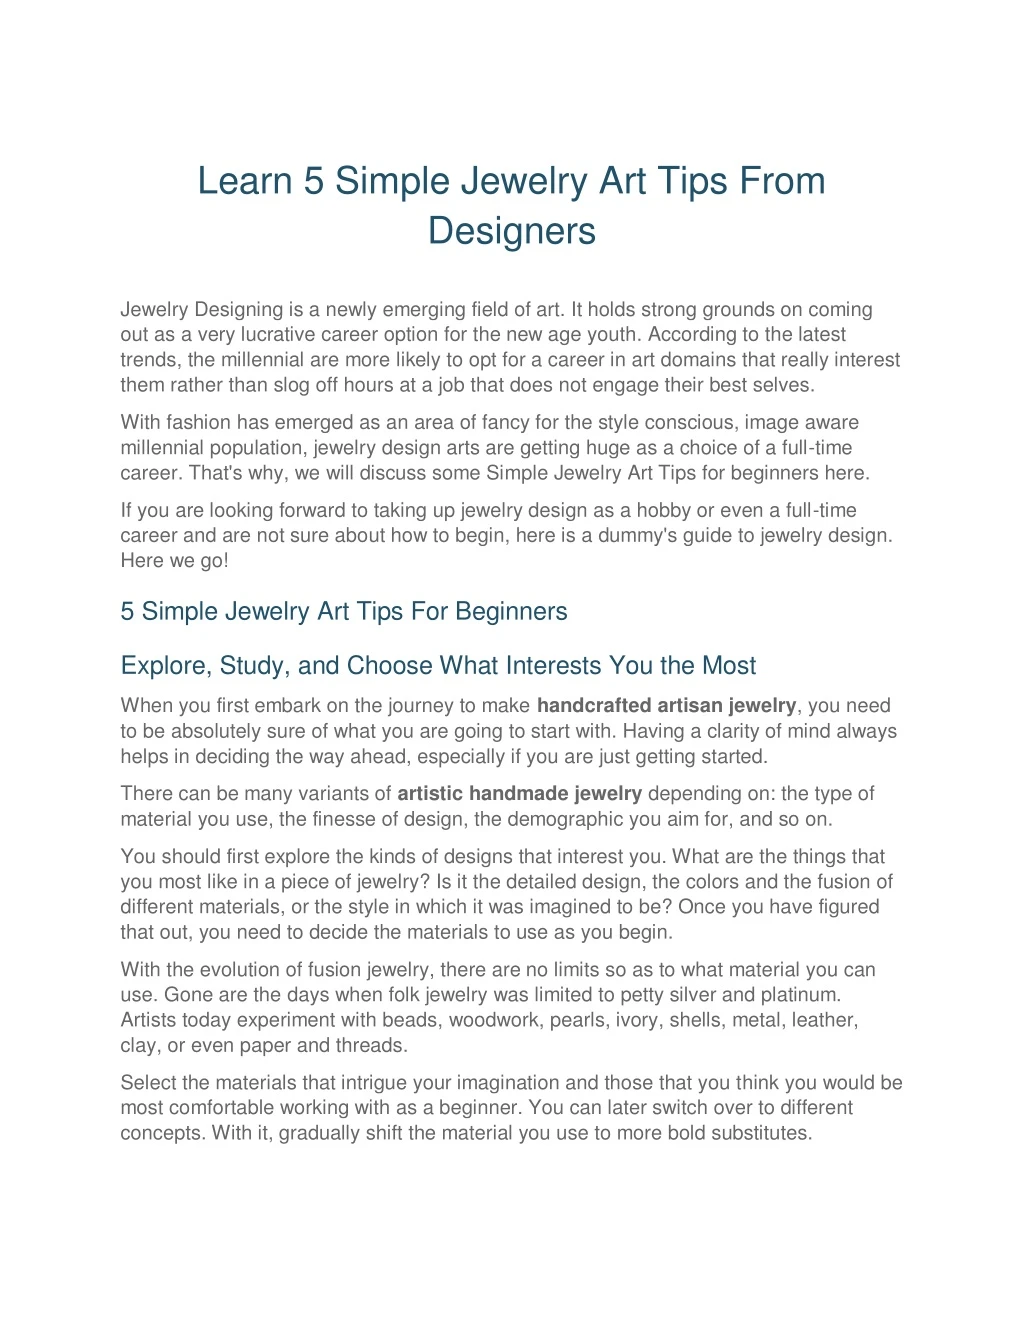 learn 5 simple jewelry art tips from designers